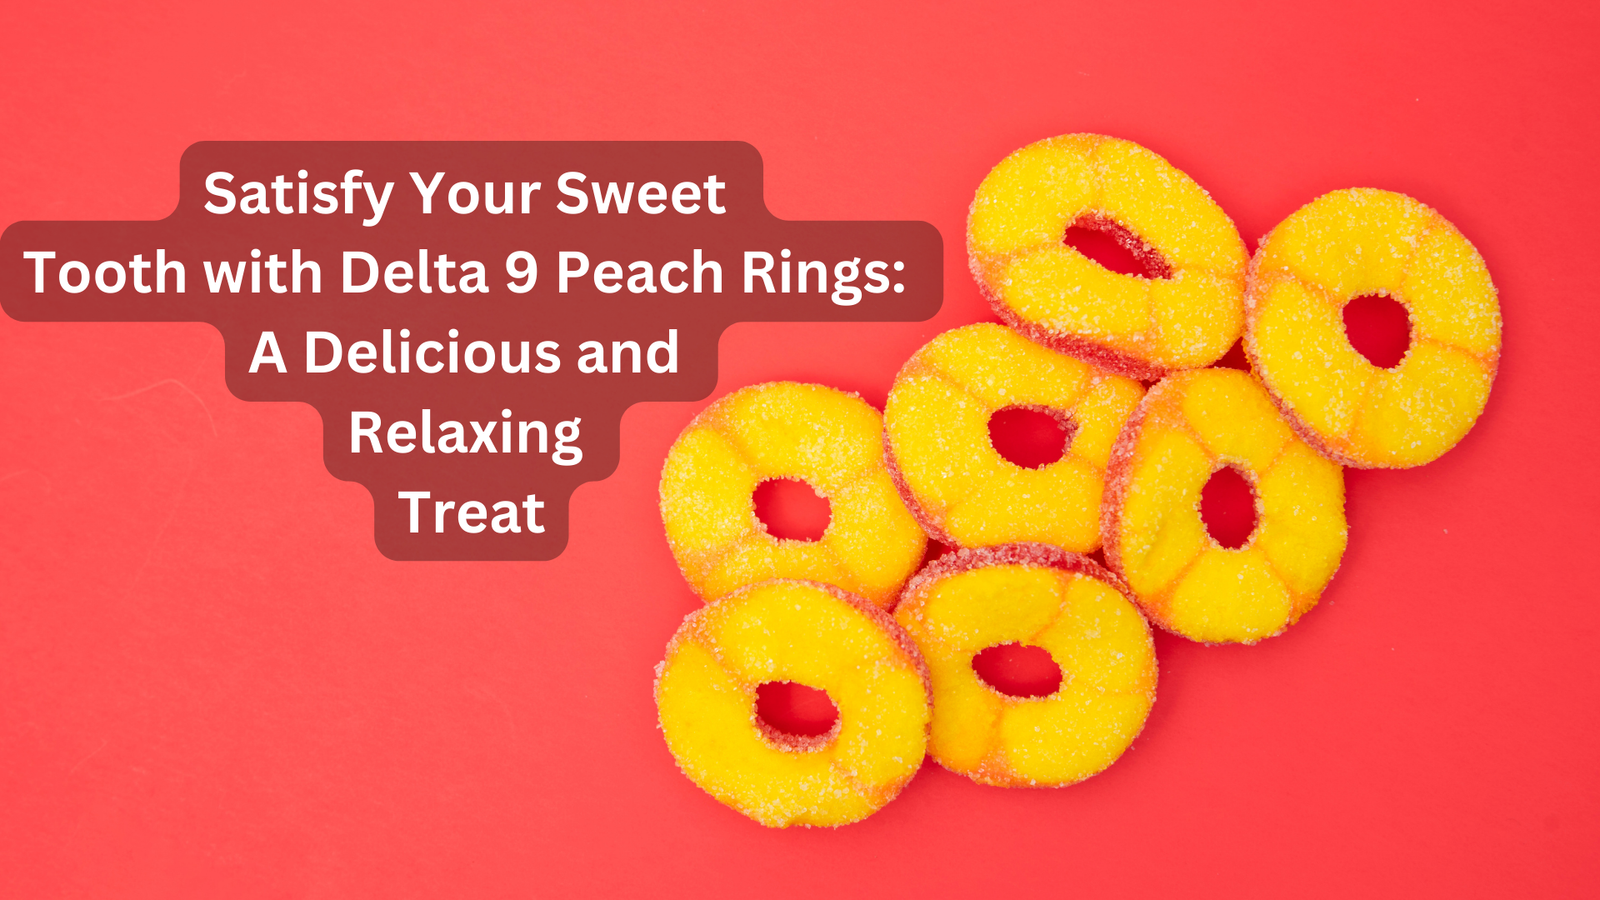 You are currently viewing Satisfy Your Sweet Tooth with Delta 9 Peach Rings: A Delicious and Relaxing Treat